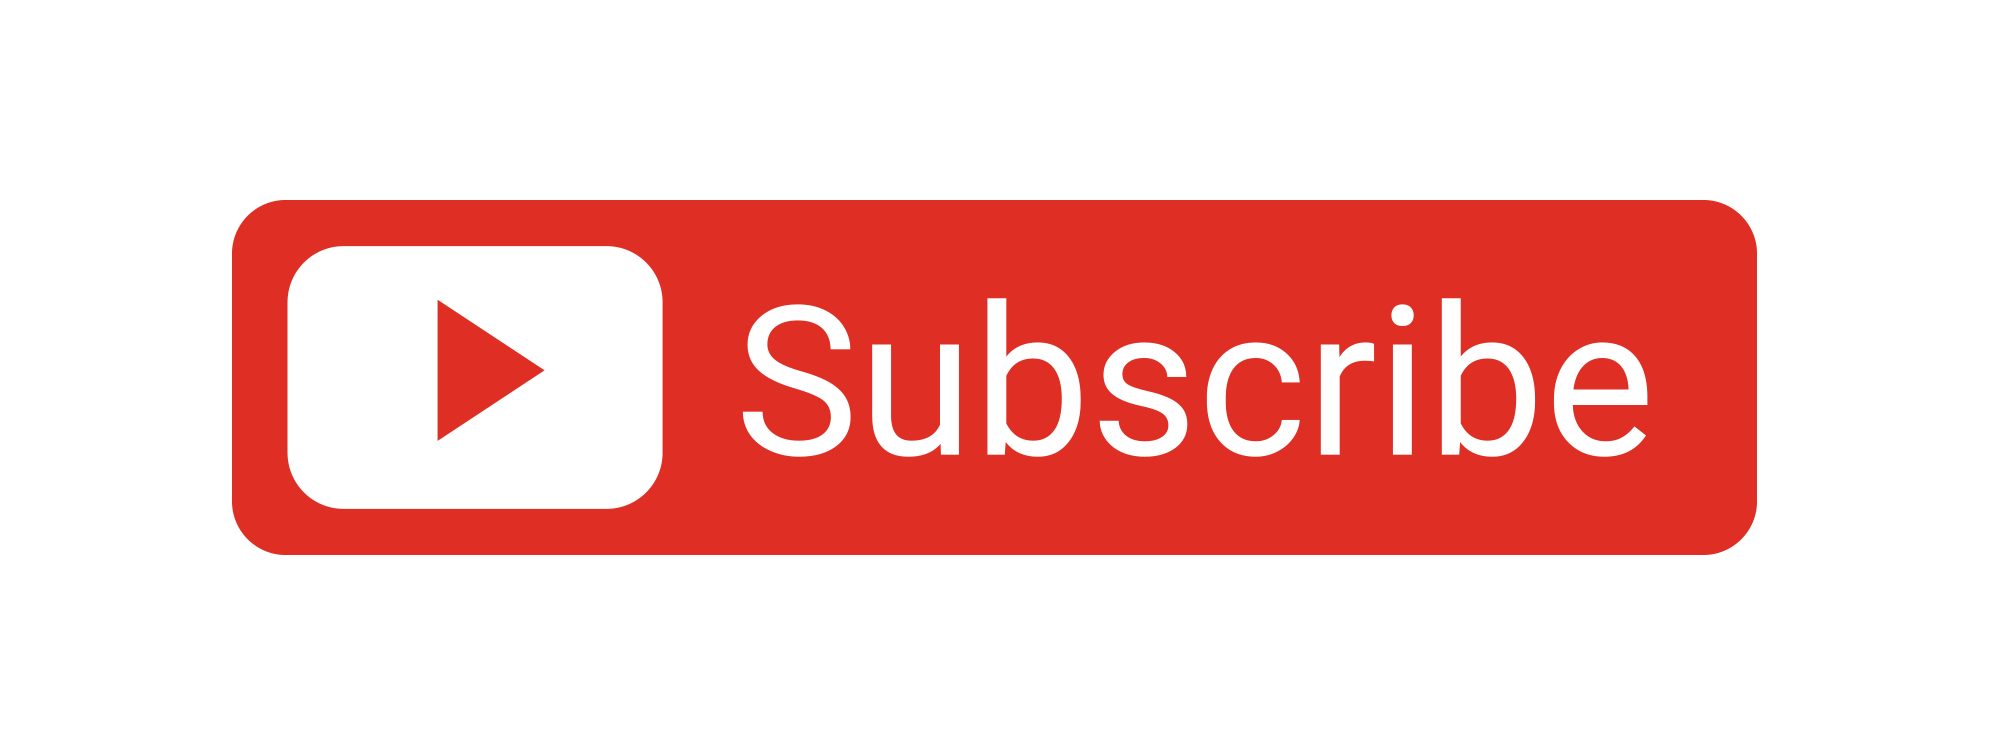 Download Youtube Subscribe Button Png Image Transparent Sexiezpix Web